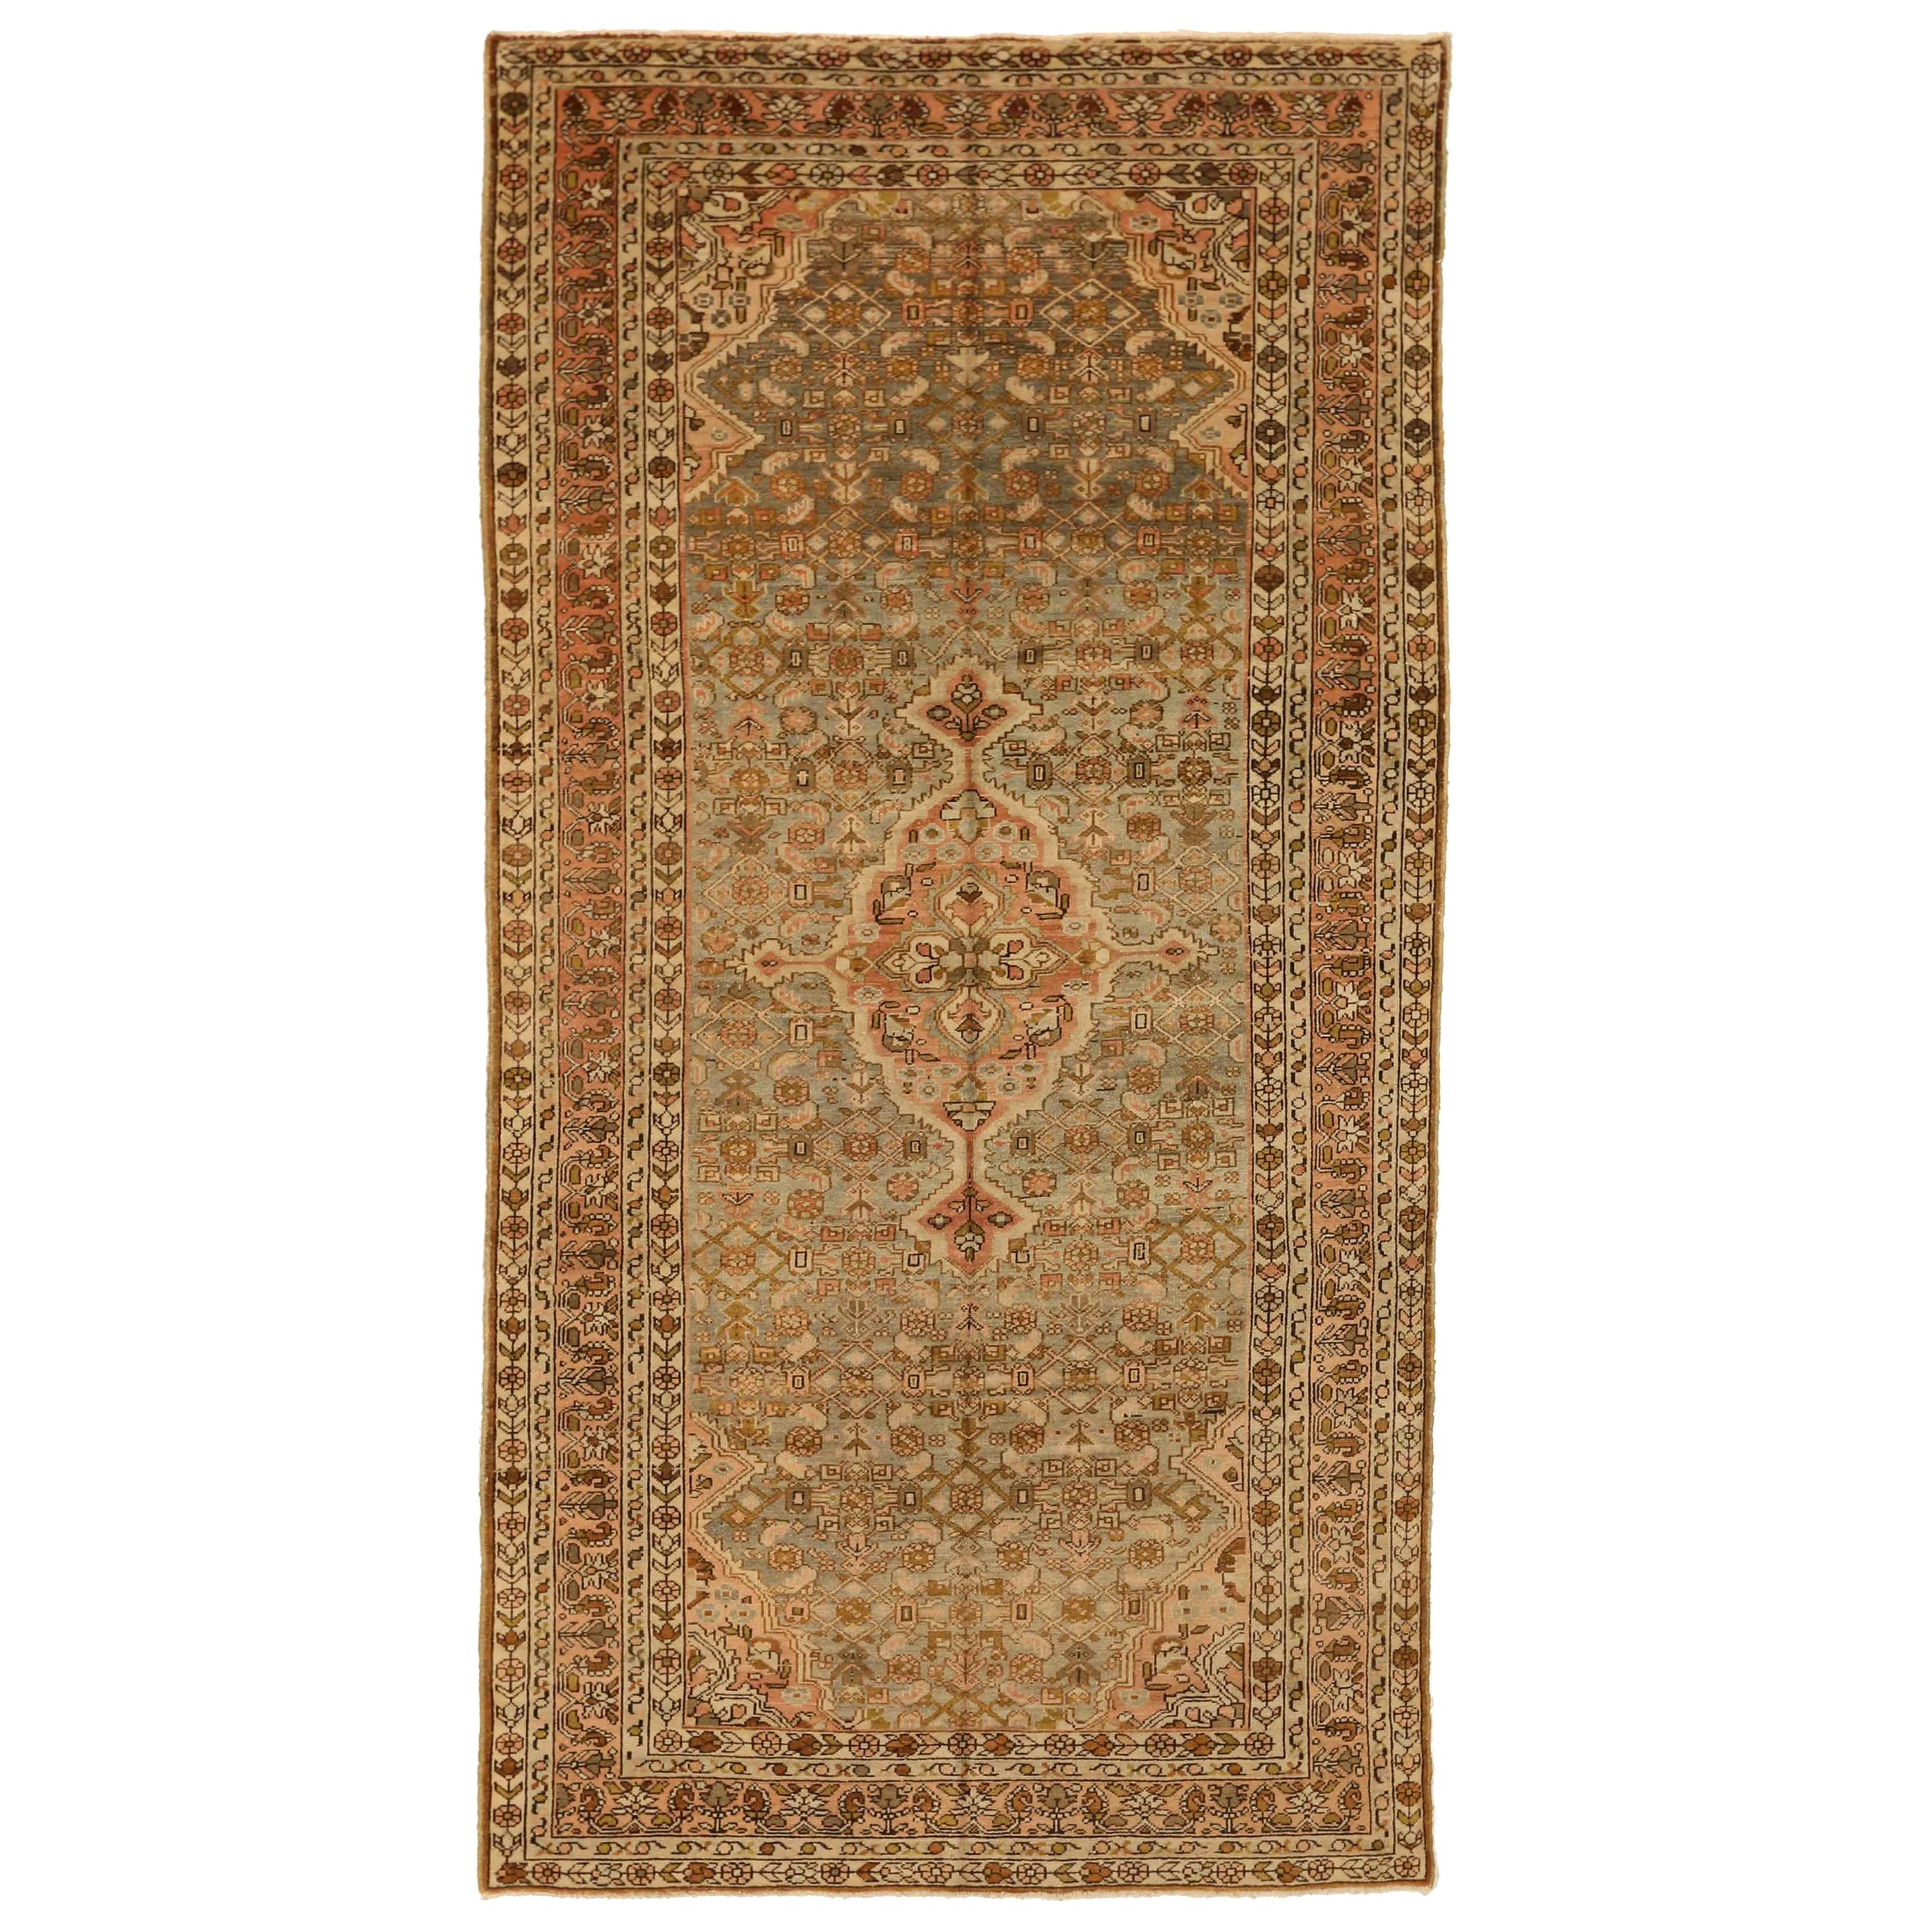 Antique Persian Malayer Rug with Floral Details on Ivory Field